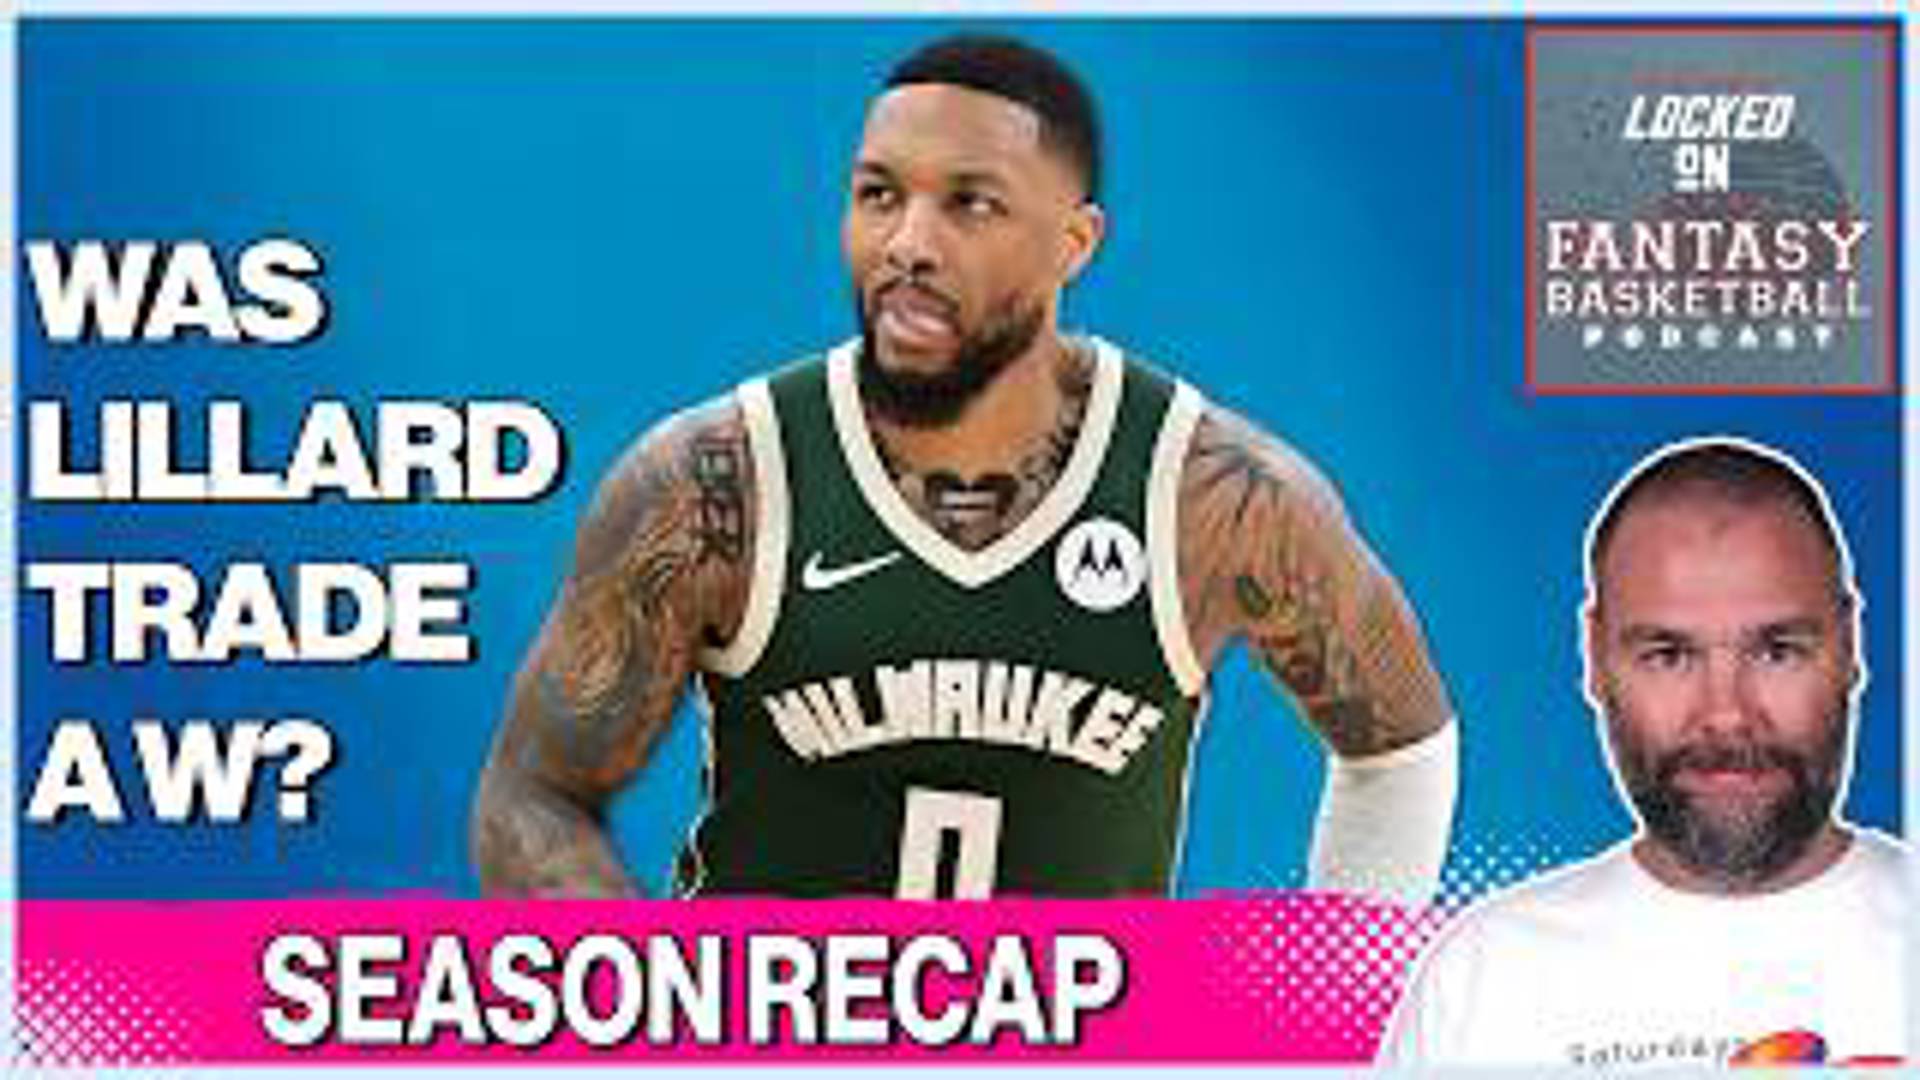 Join Josh Lloyd as he dives into the Milwaukee Bucks' tumultuous season. From coaching changes and Giannis Antetokounmpo's injury concerns to Lillard's performance.